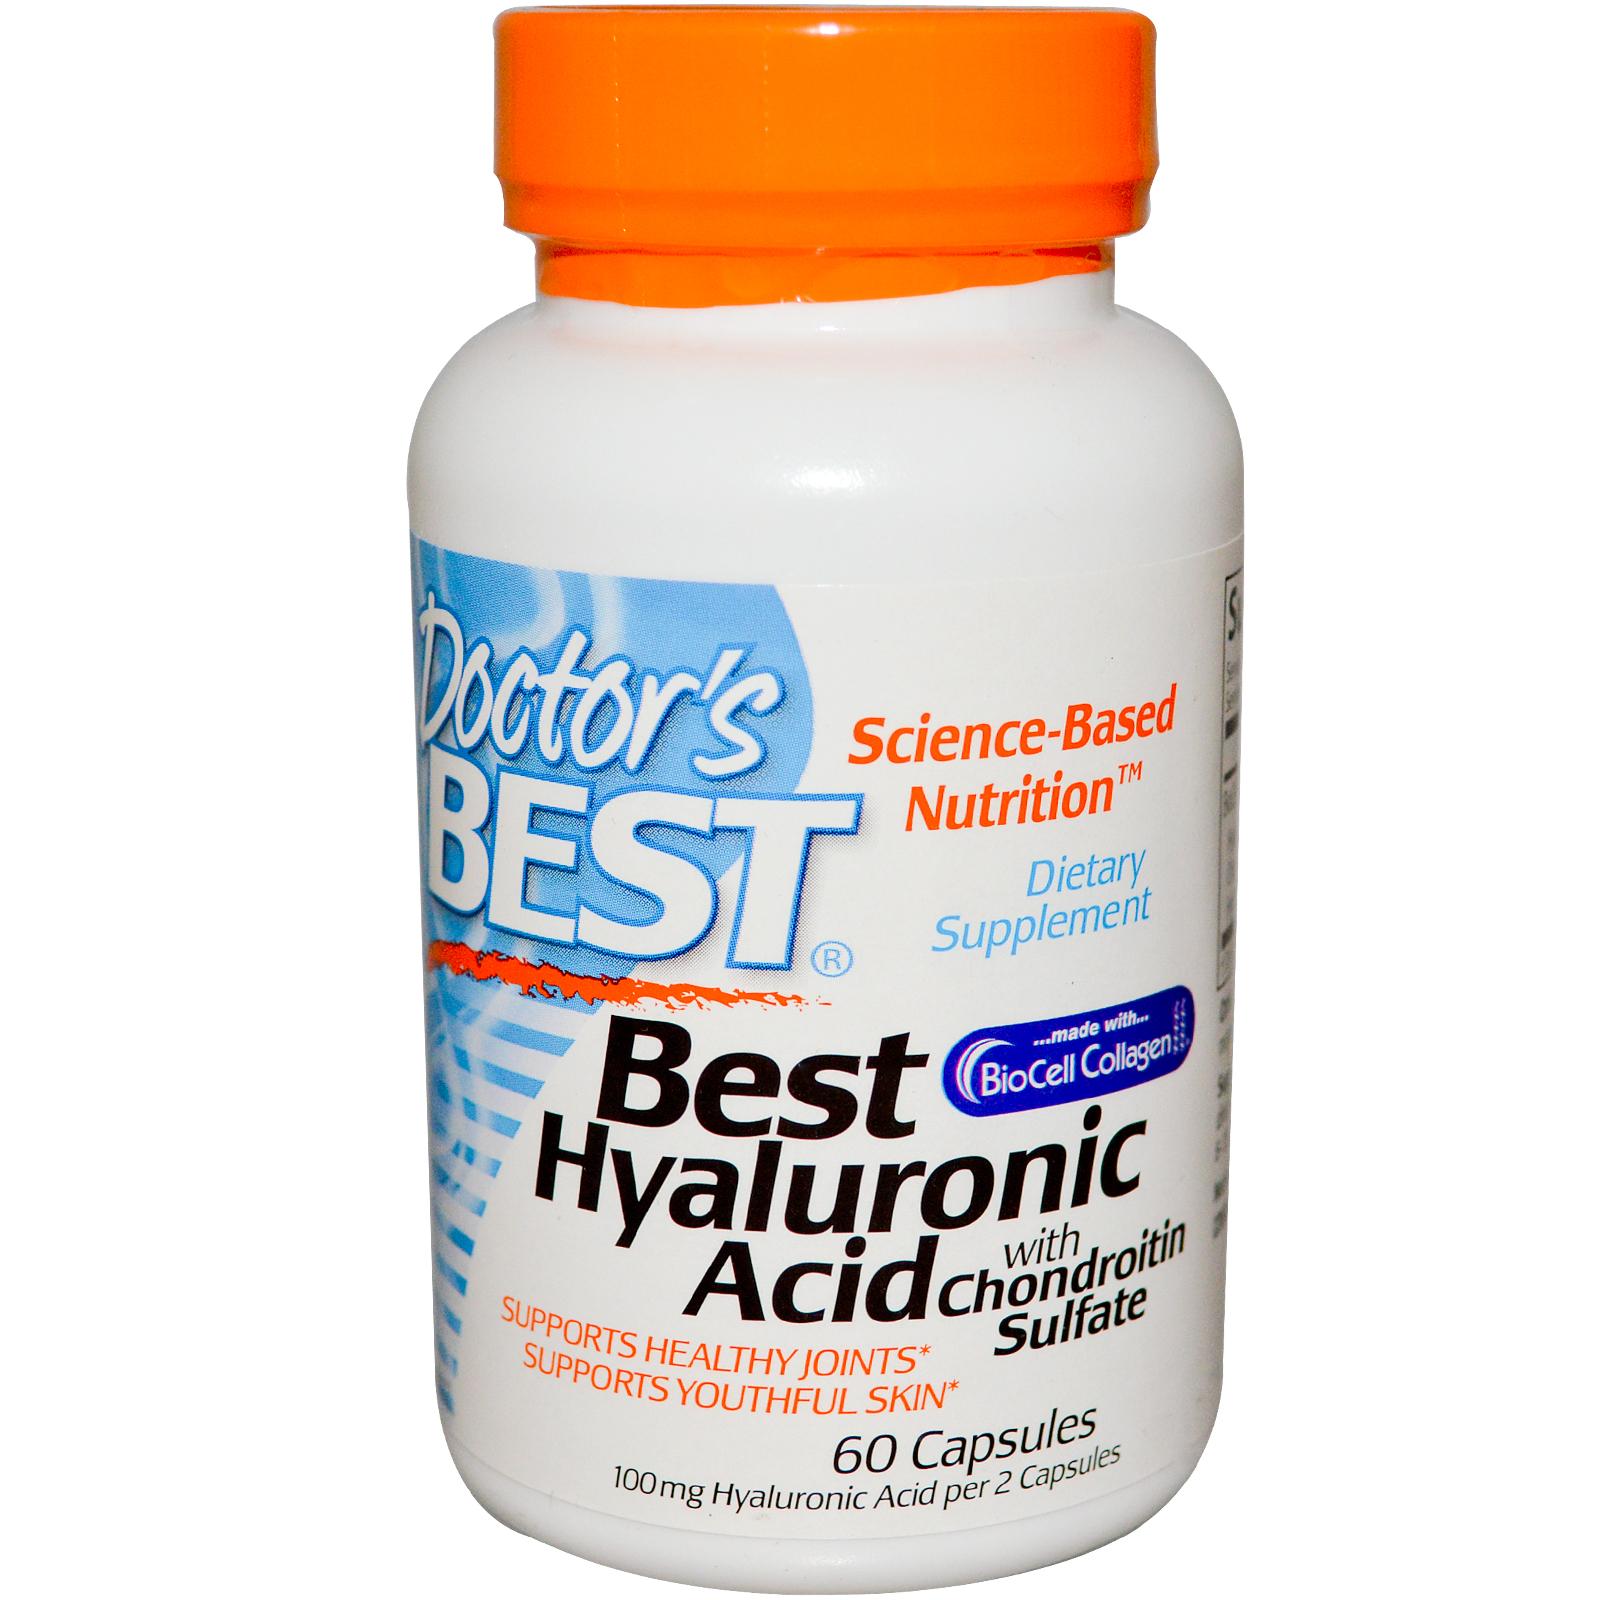 Doctors Best Best Hyaluronic Acid with Chondroitin Sulfate   $11.39